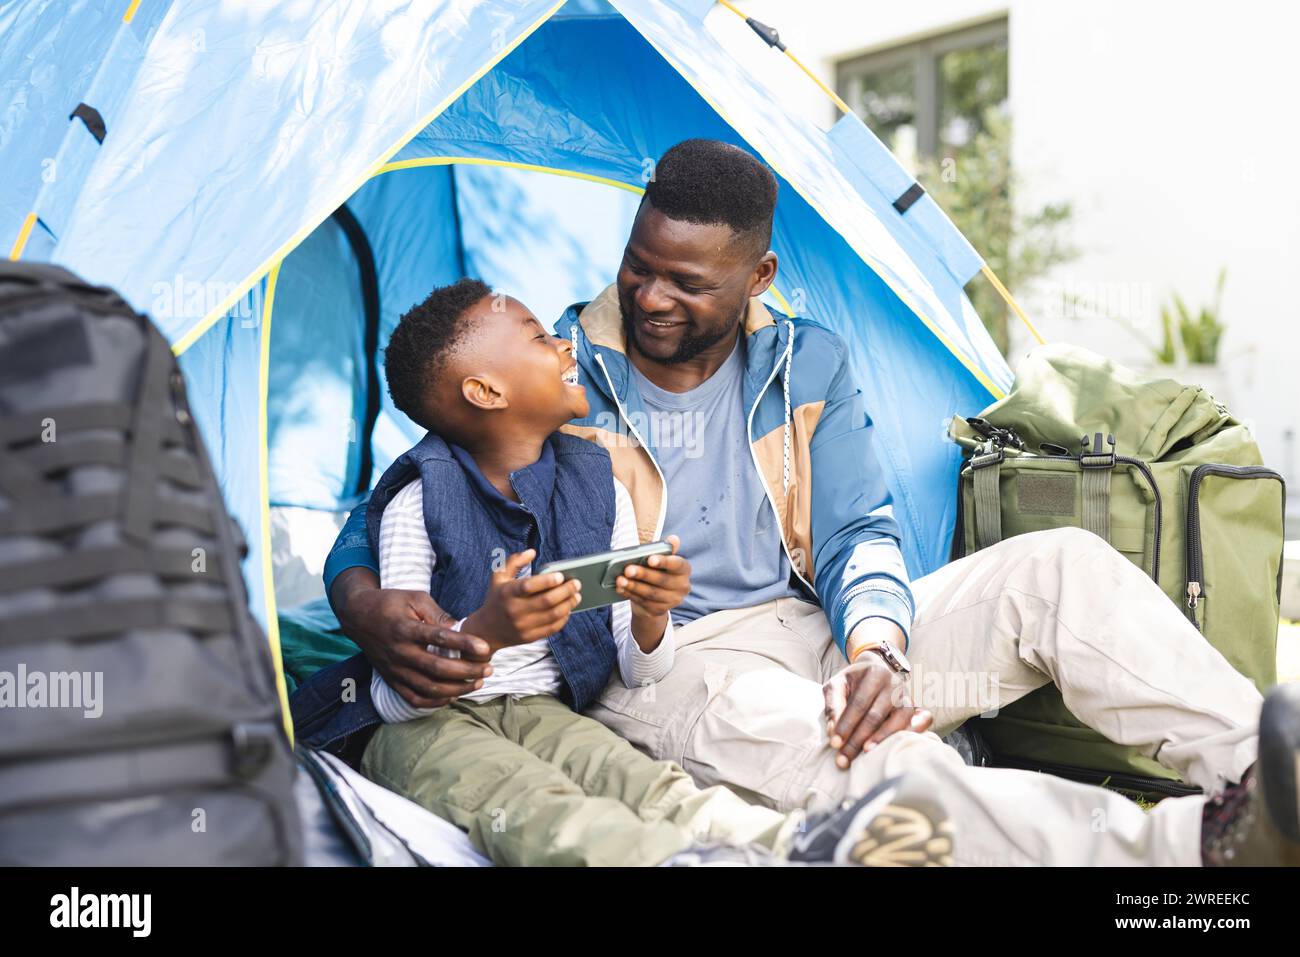 African American father and son share a joyful moment inside a tent in the backyard Stock Photo